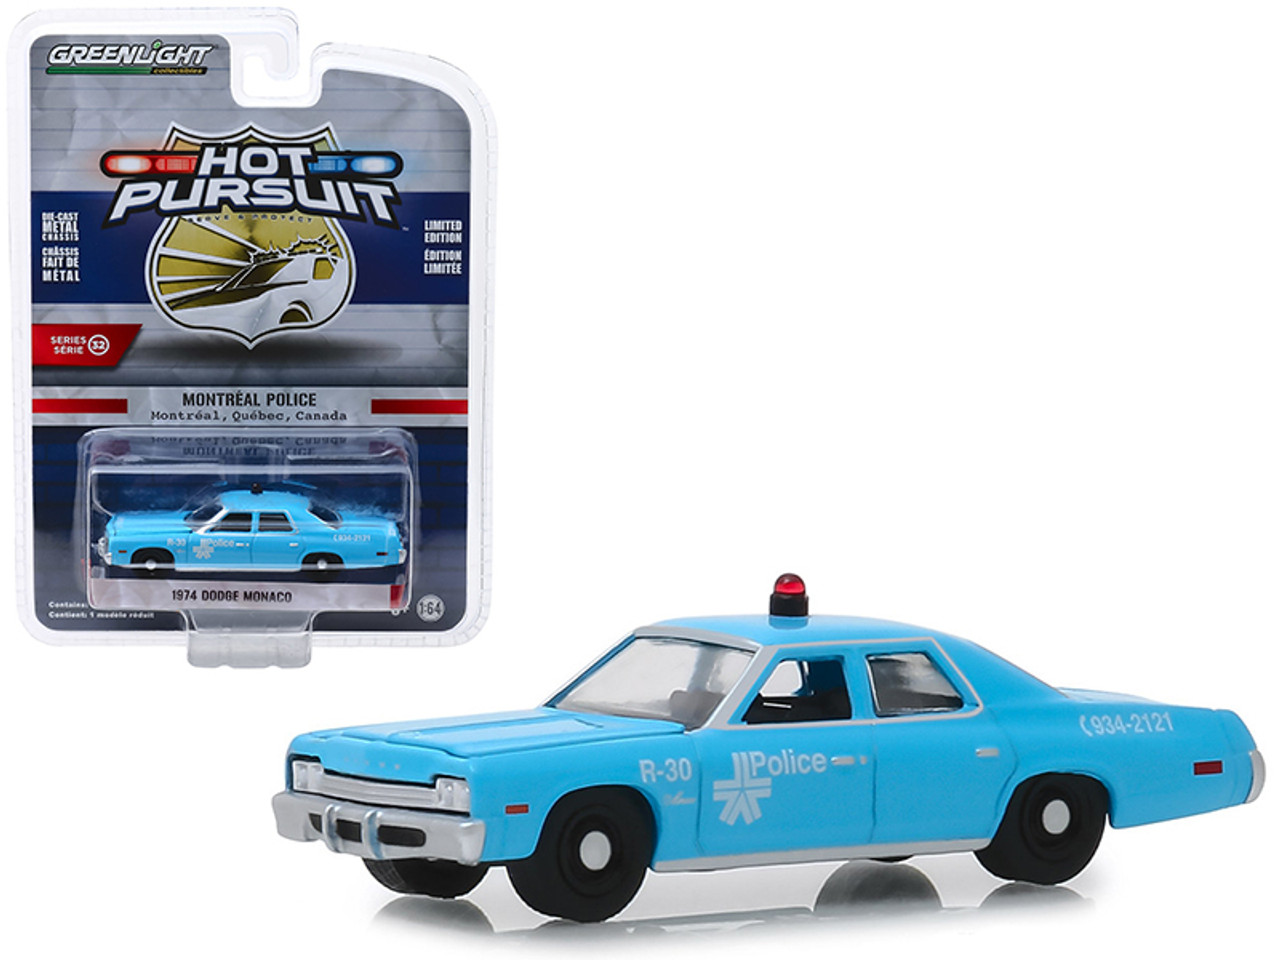 1974 Dodge Monaco "Montreal Police" (Canada) Light Blue "Hot Pursuit" Series 32 1/64 Diecast Model Car by Greenlight